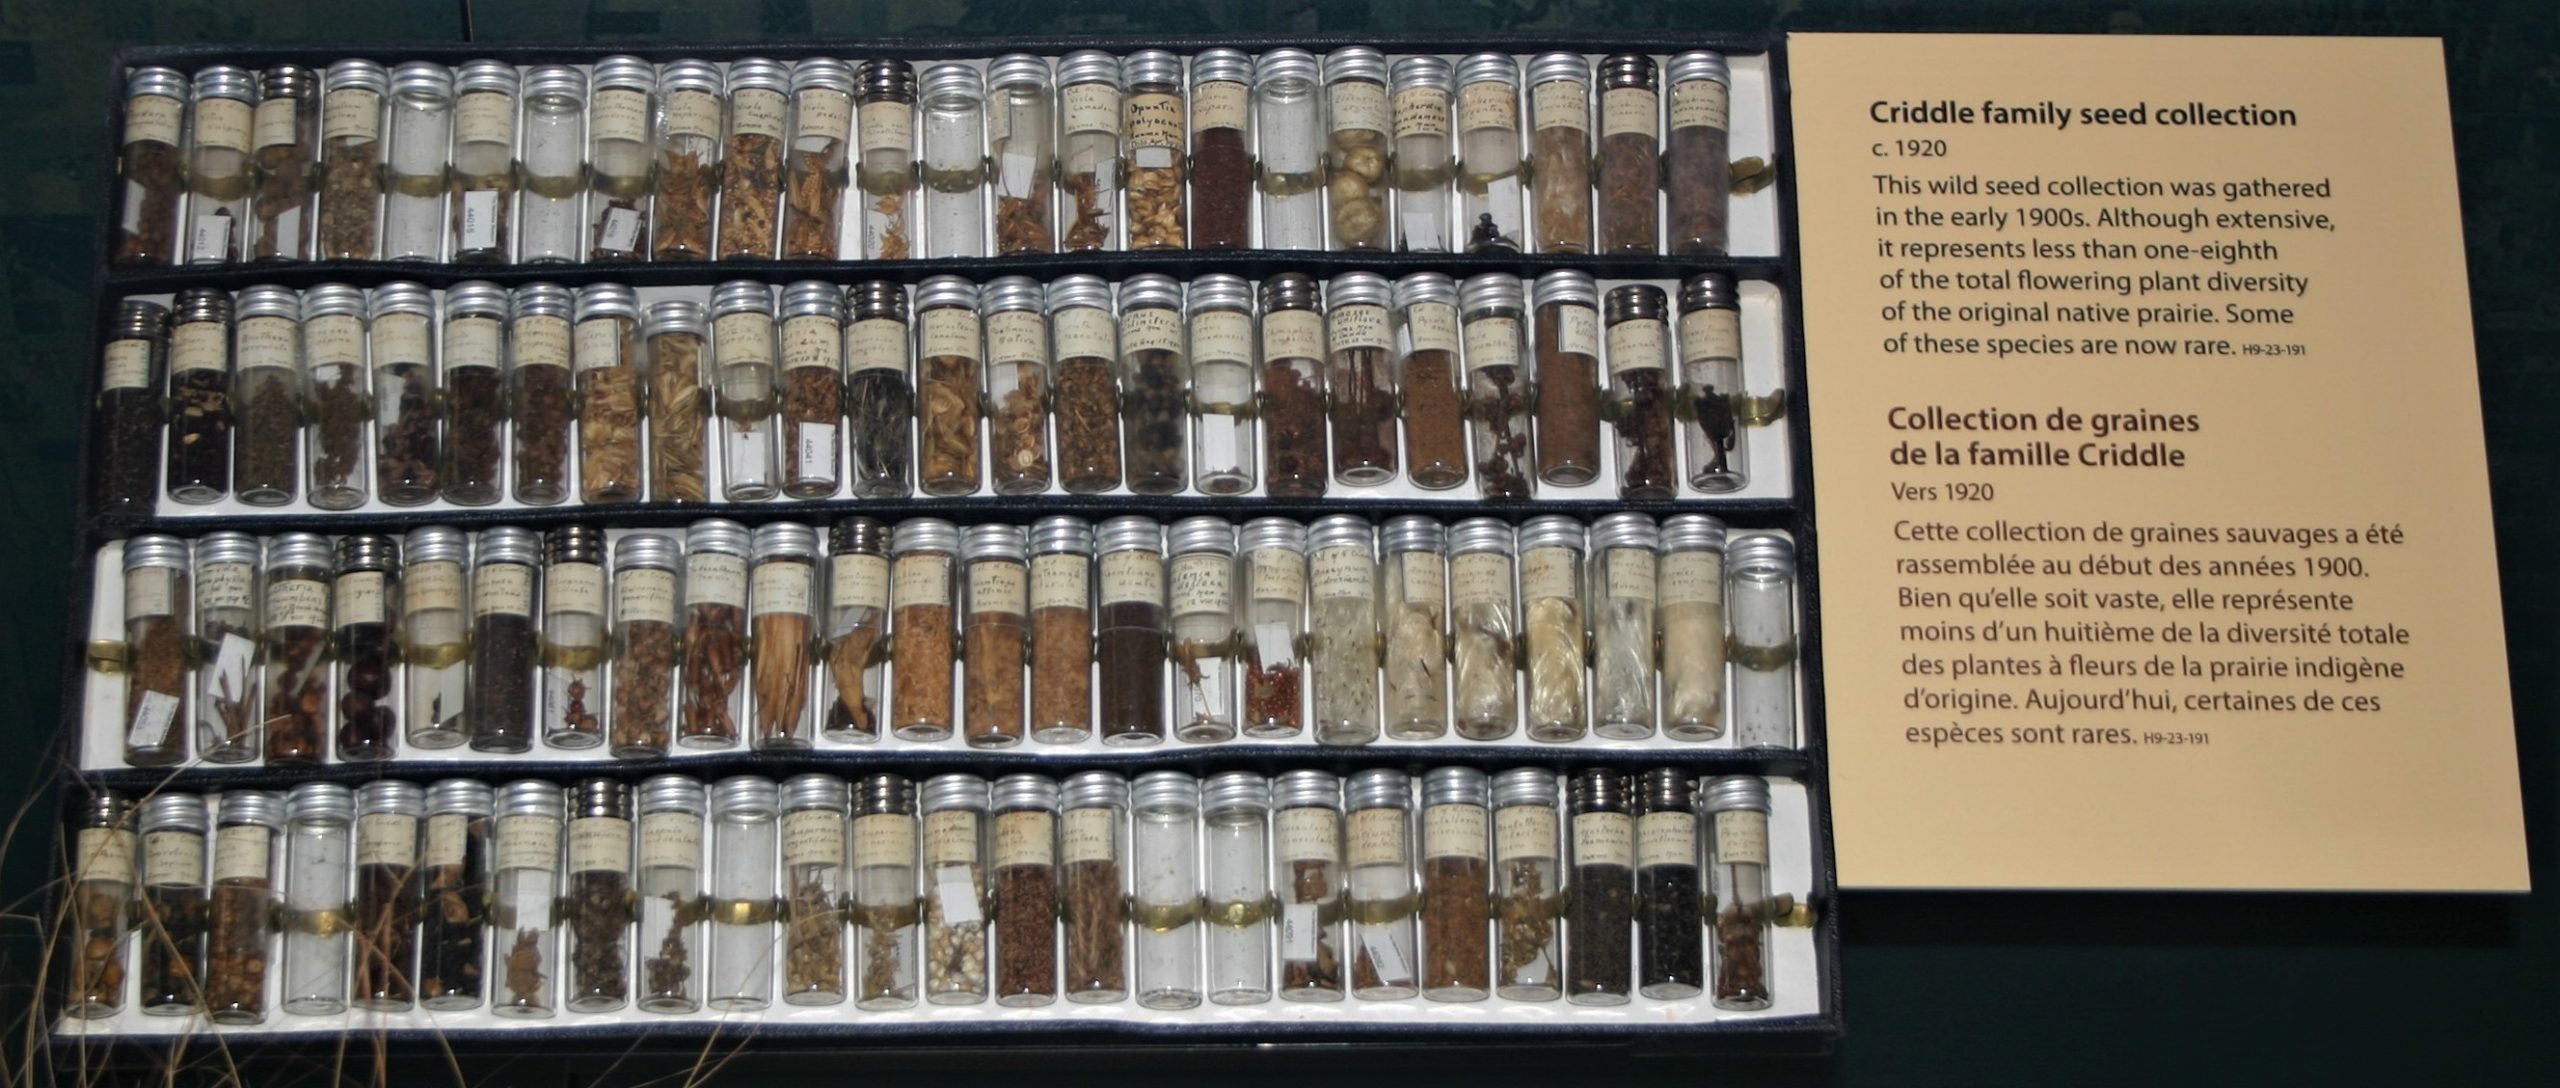 A display case with four rows of vials filled with wildflower seeds.